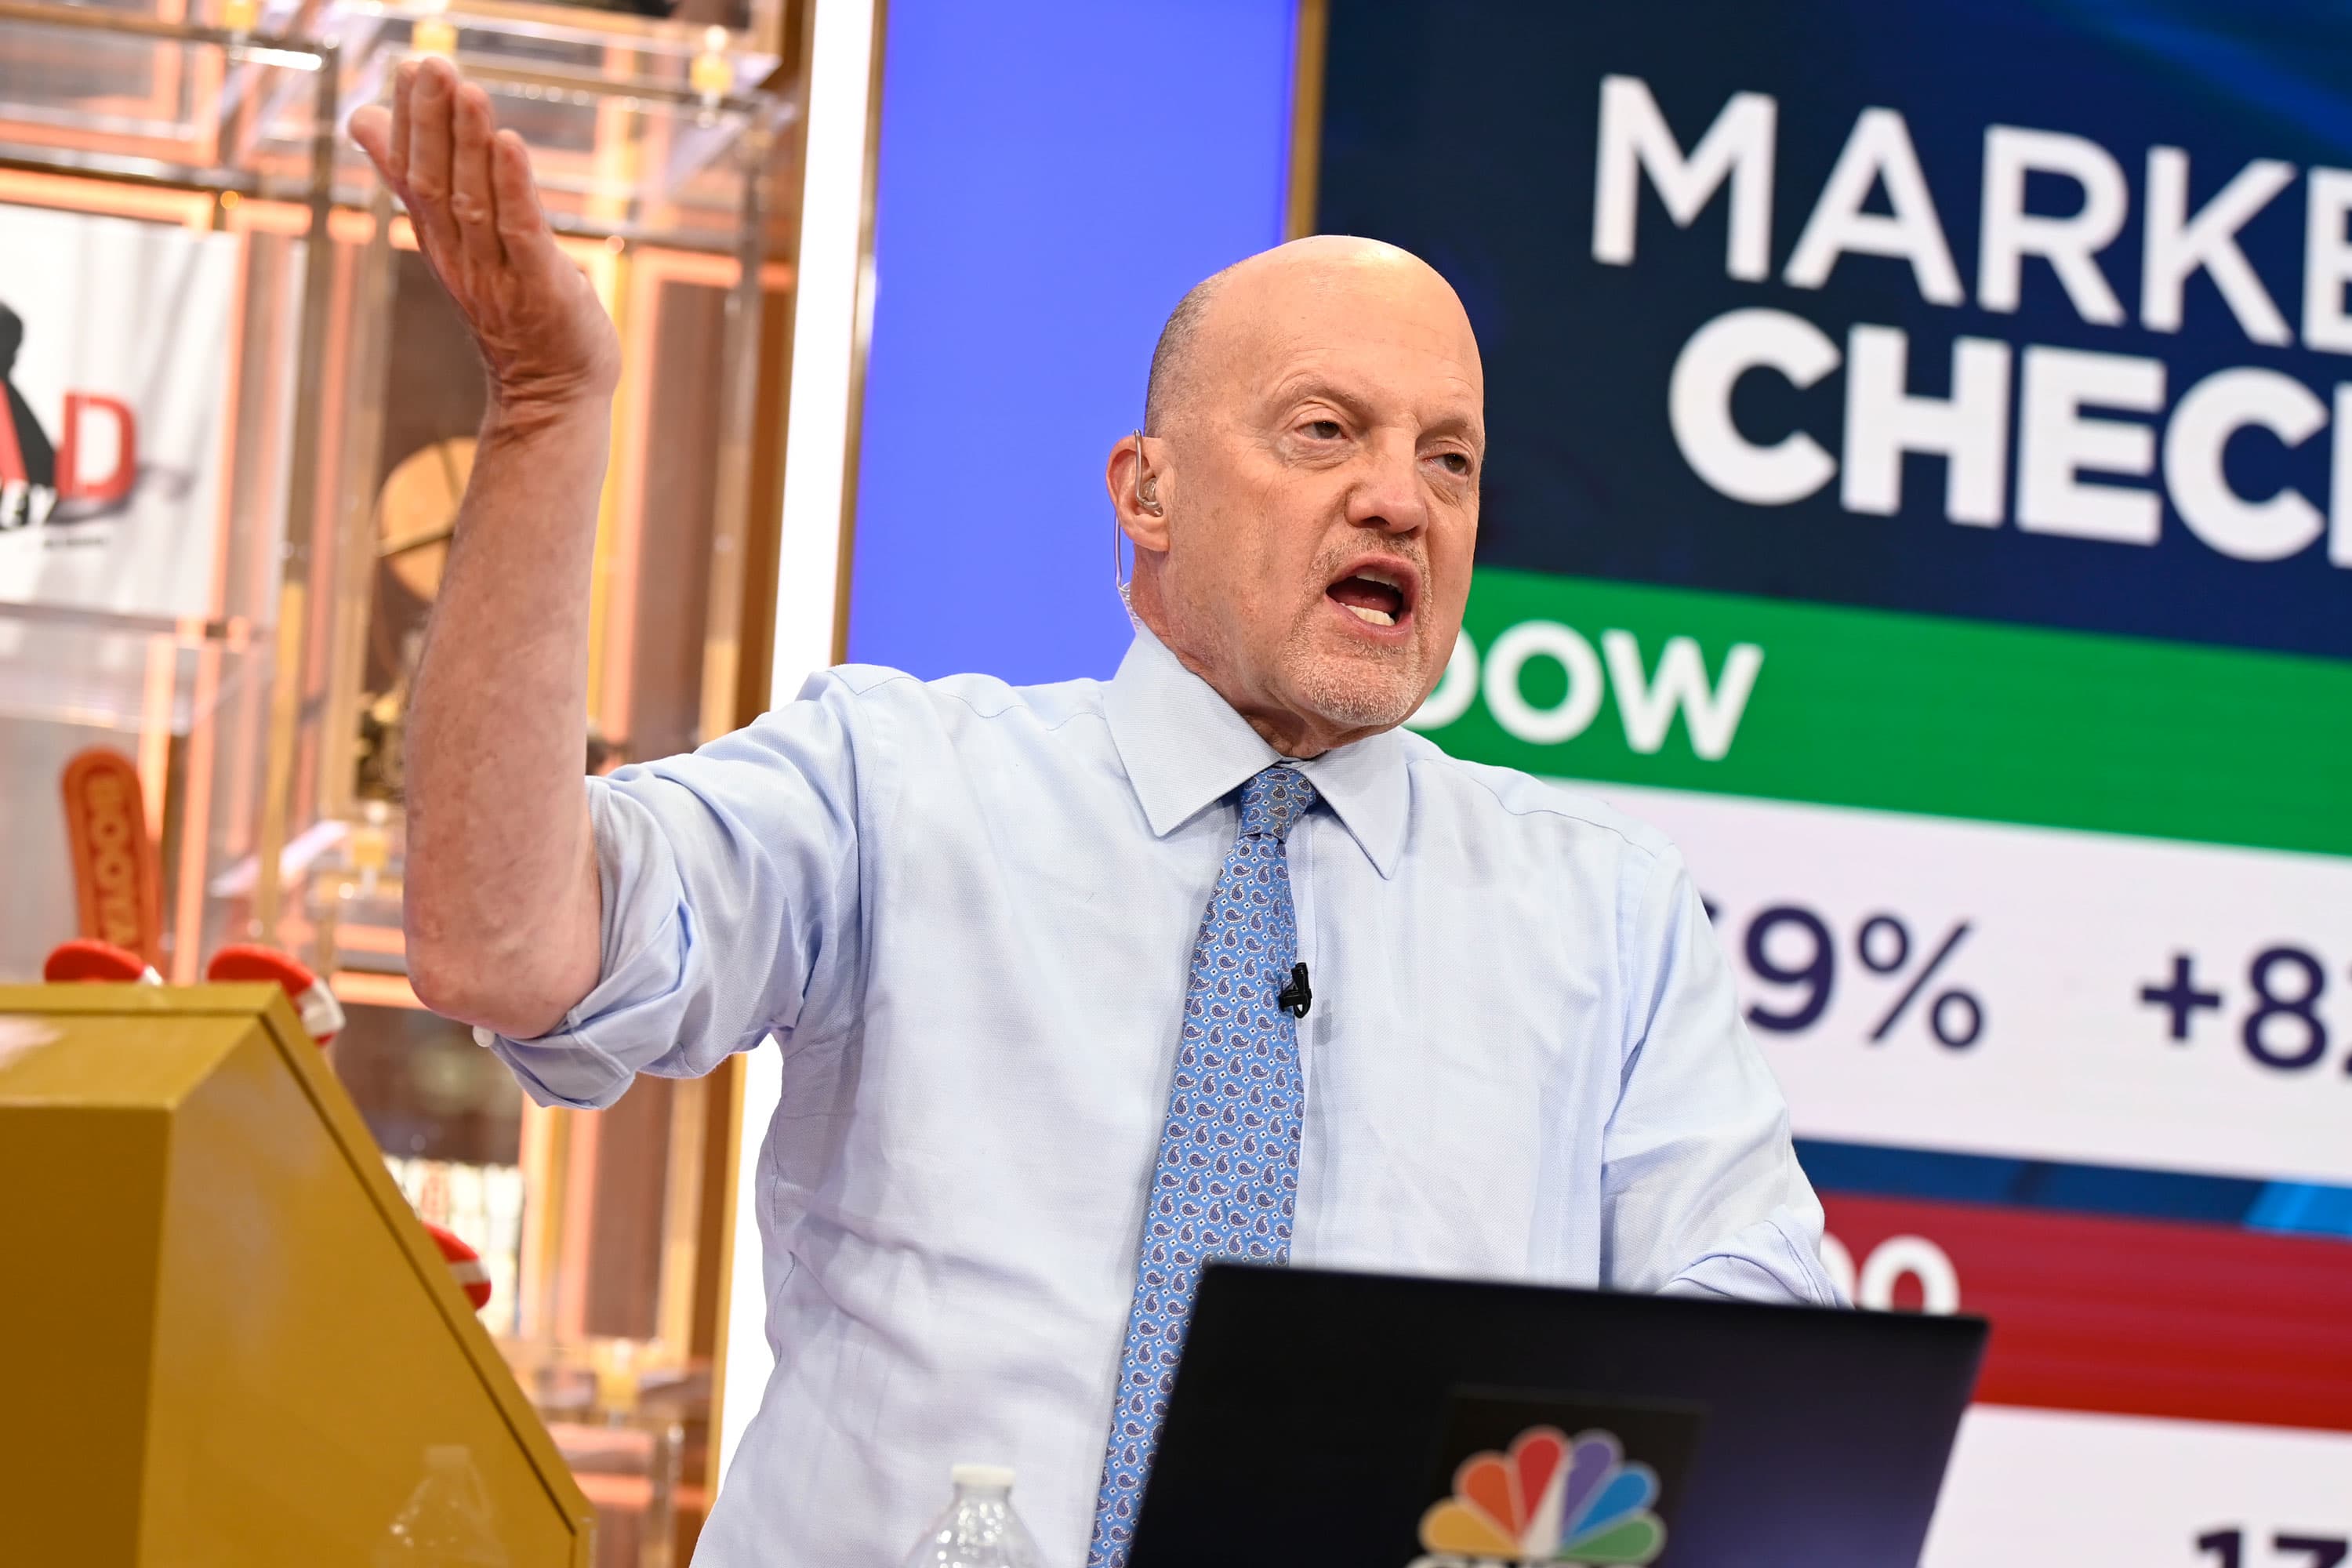 Jim Cramer's top 10 things to watch in the stock market Wednesday